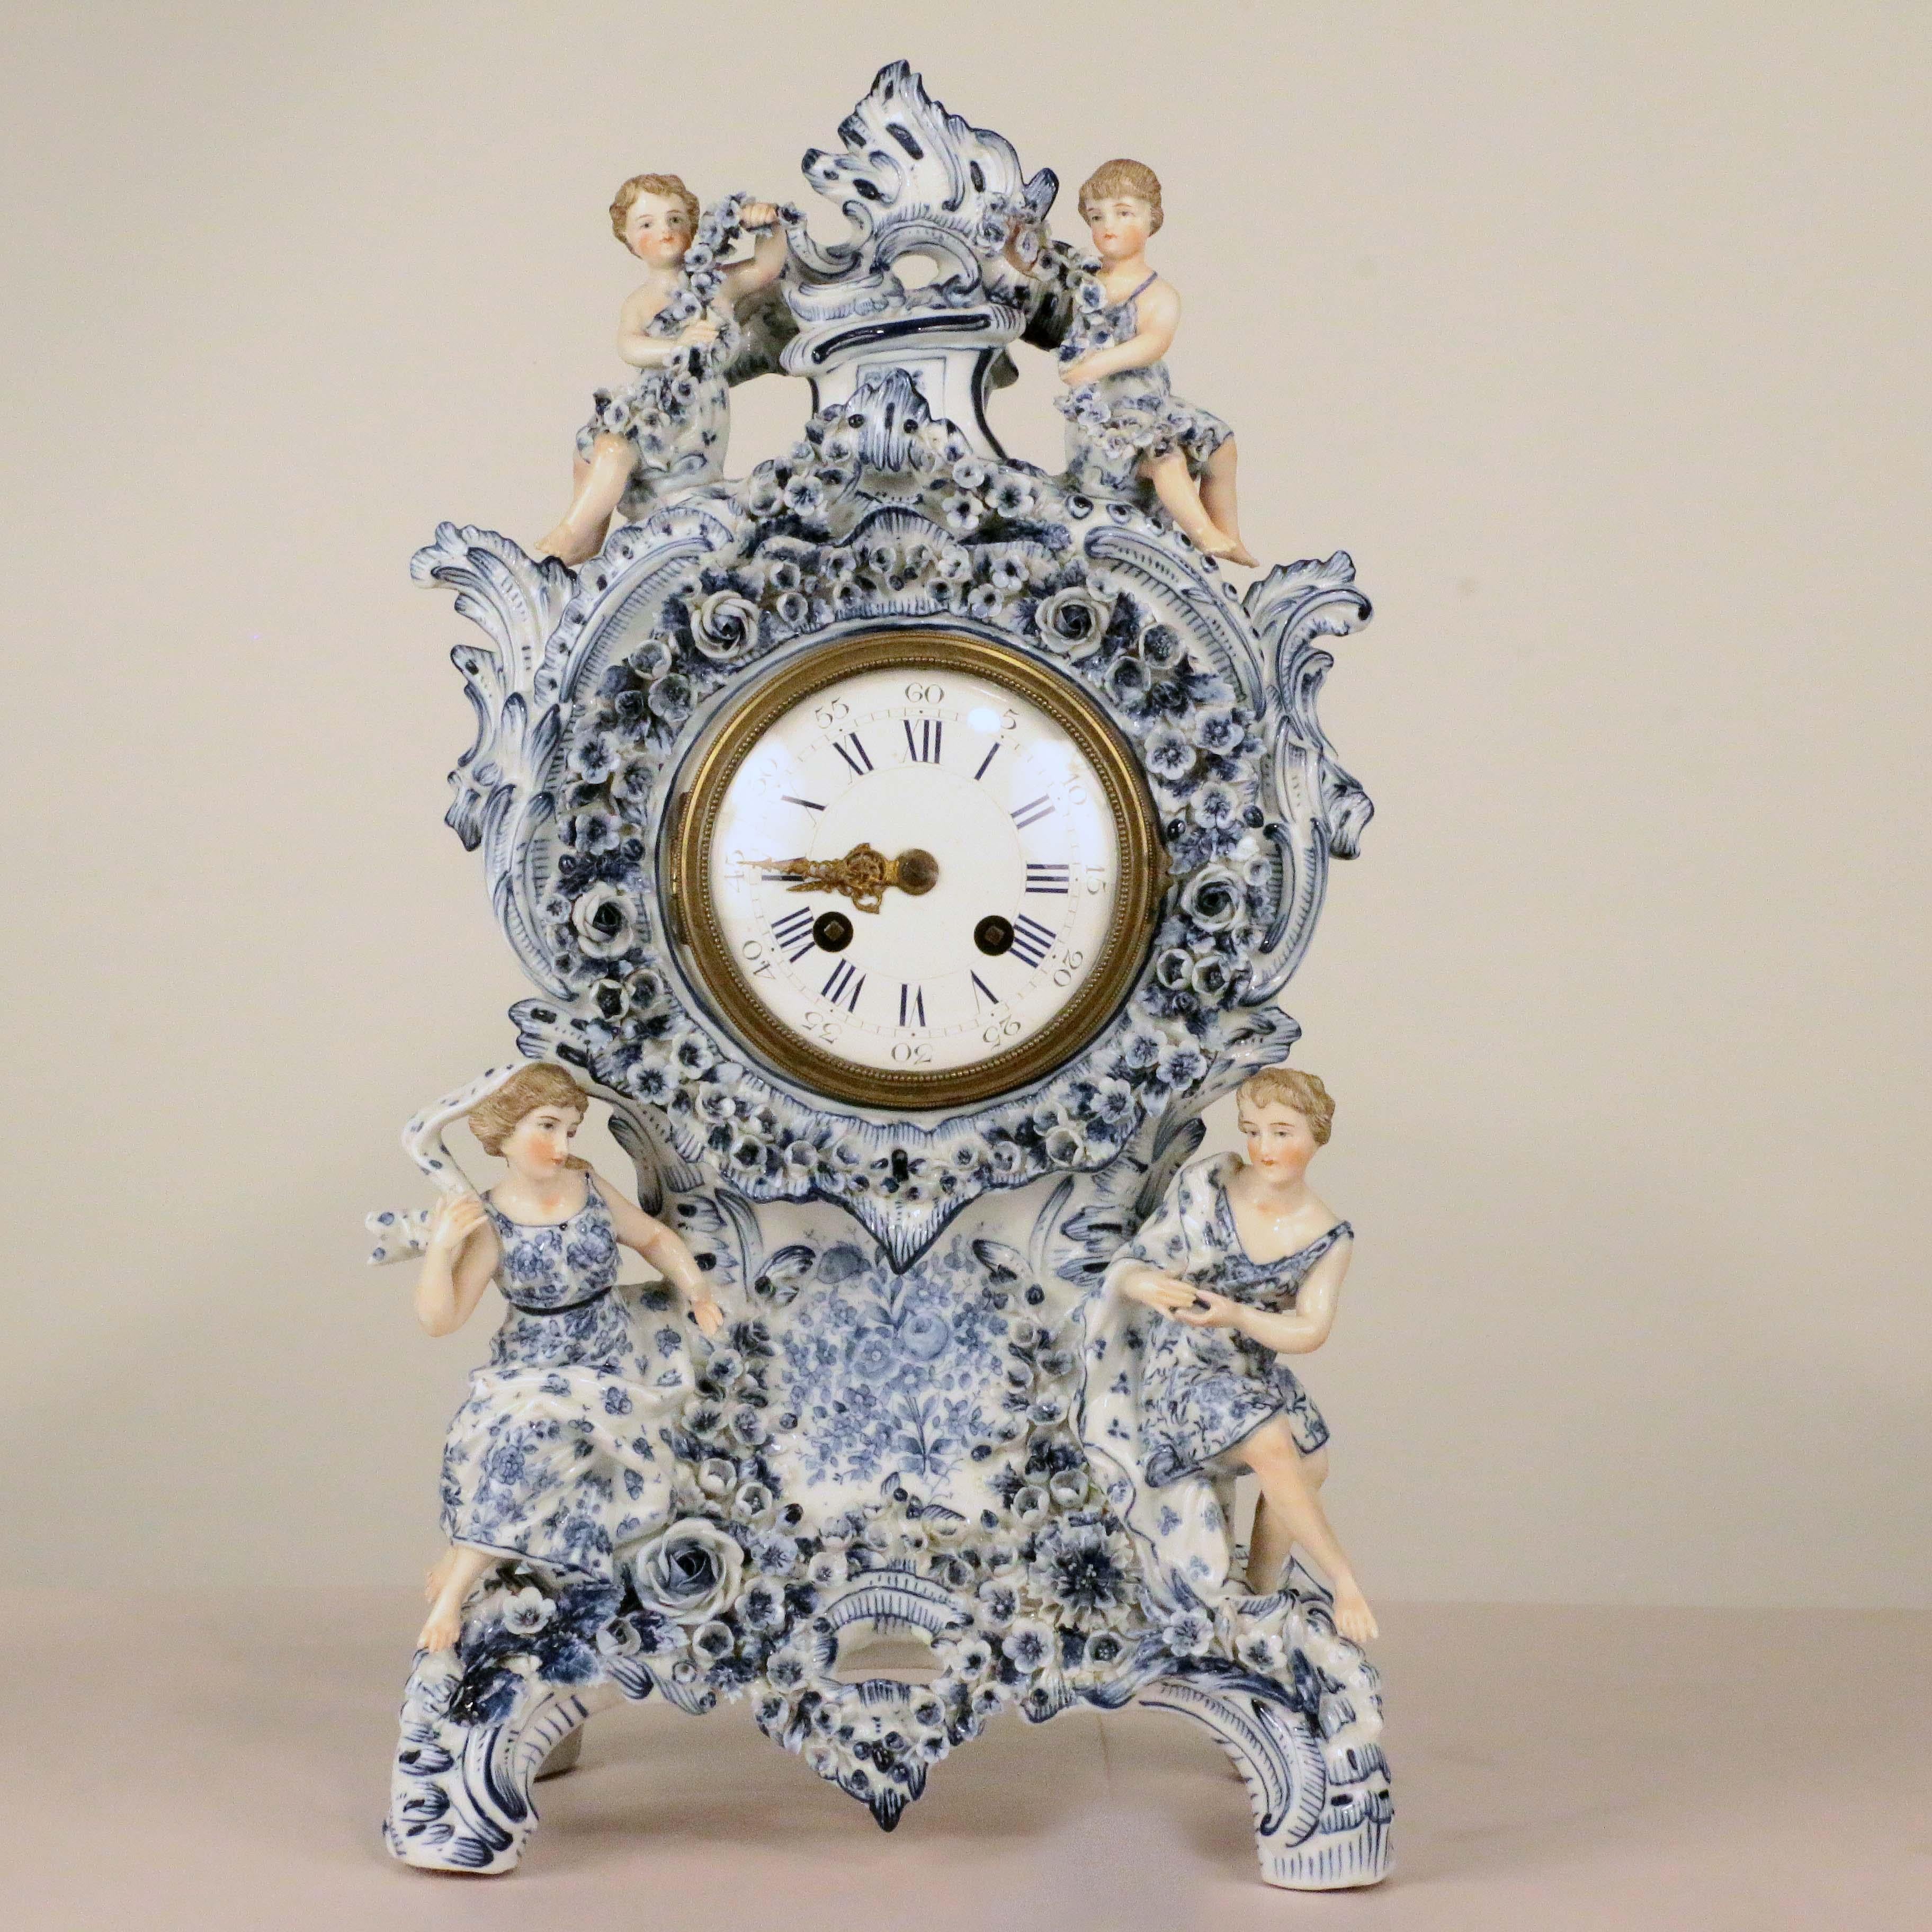 For those who enjoy the fine quality of blue and white German porcelain from the middle of the last century, this is a particularly fine example. On a white porcelain ground, hand-painted and applied with leaves and flowers, the clockcase and